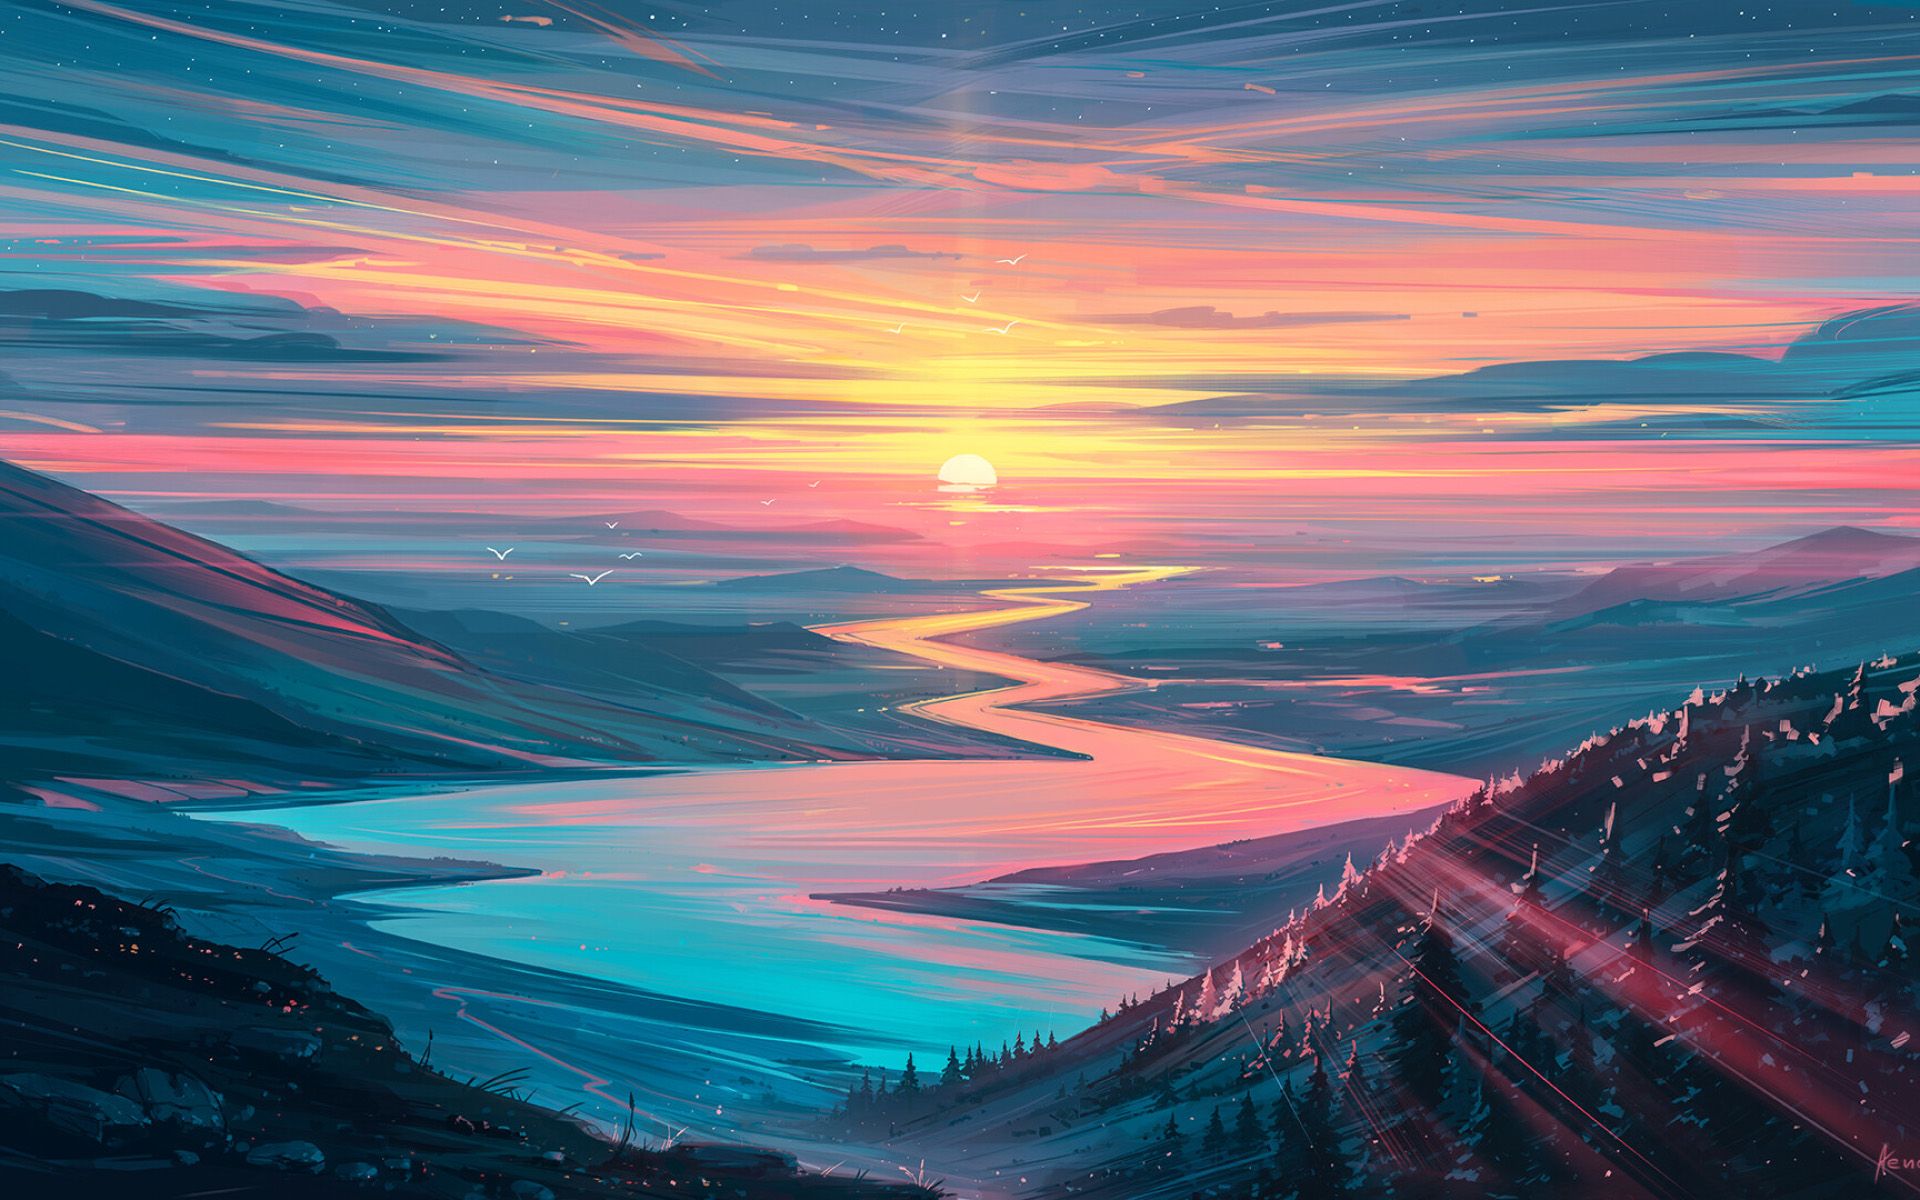 Download wallpaper abstract summer landscape, valley, sunset, mountains, abstract nature background, abstract mountains landscape, artwork, abstract landscape for desktop with resolution 1920x1200. High Quality HD picture wallpaper